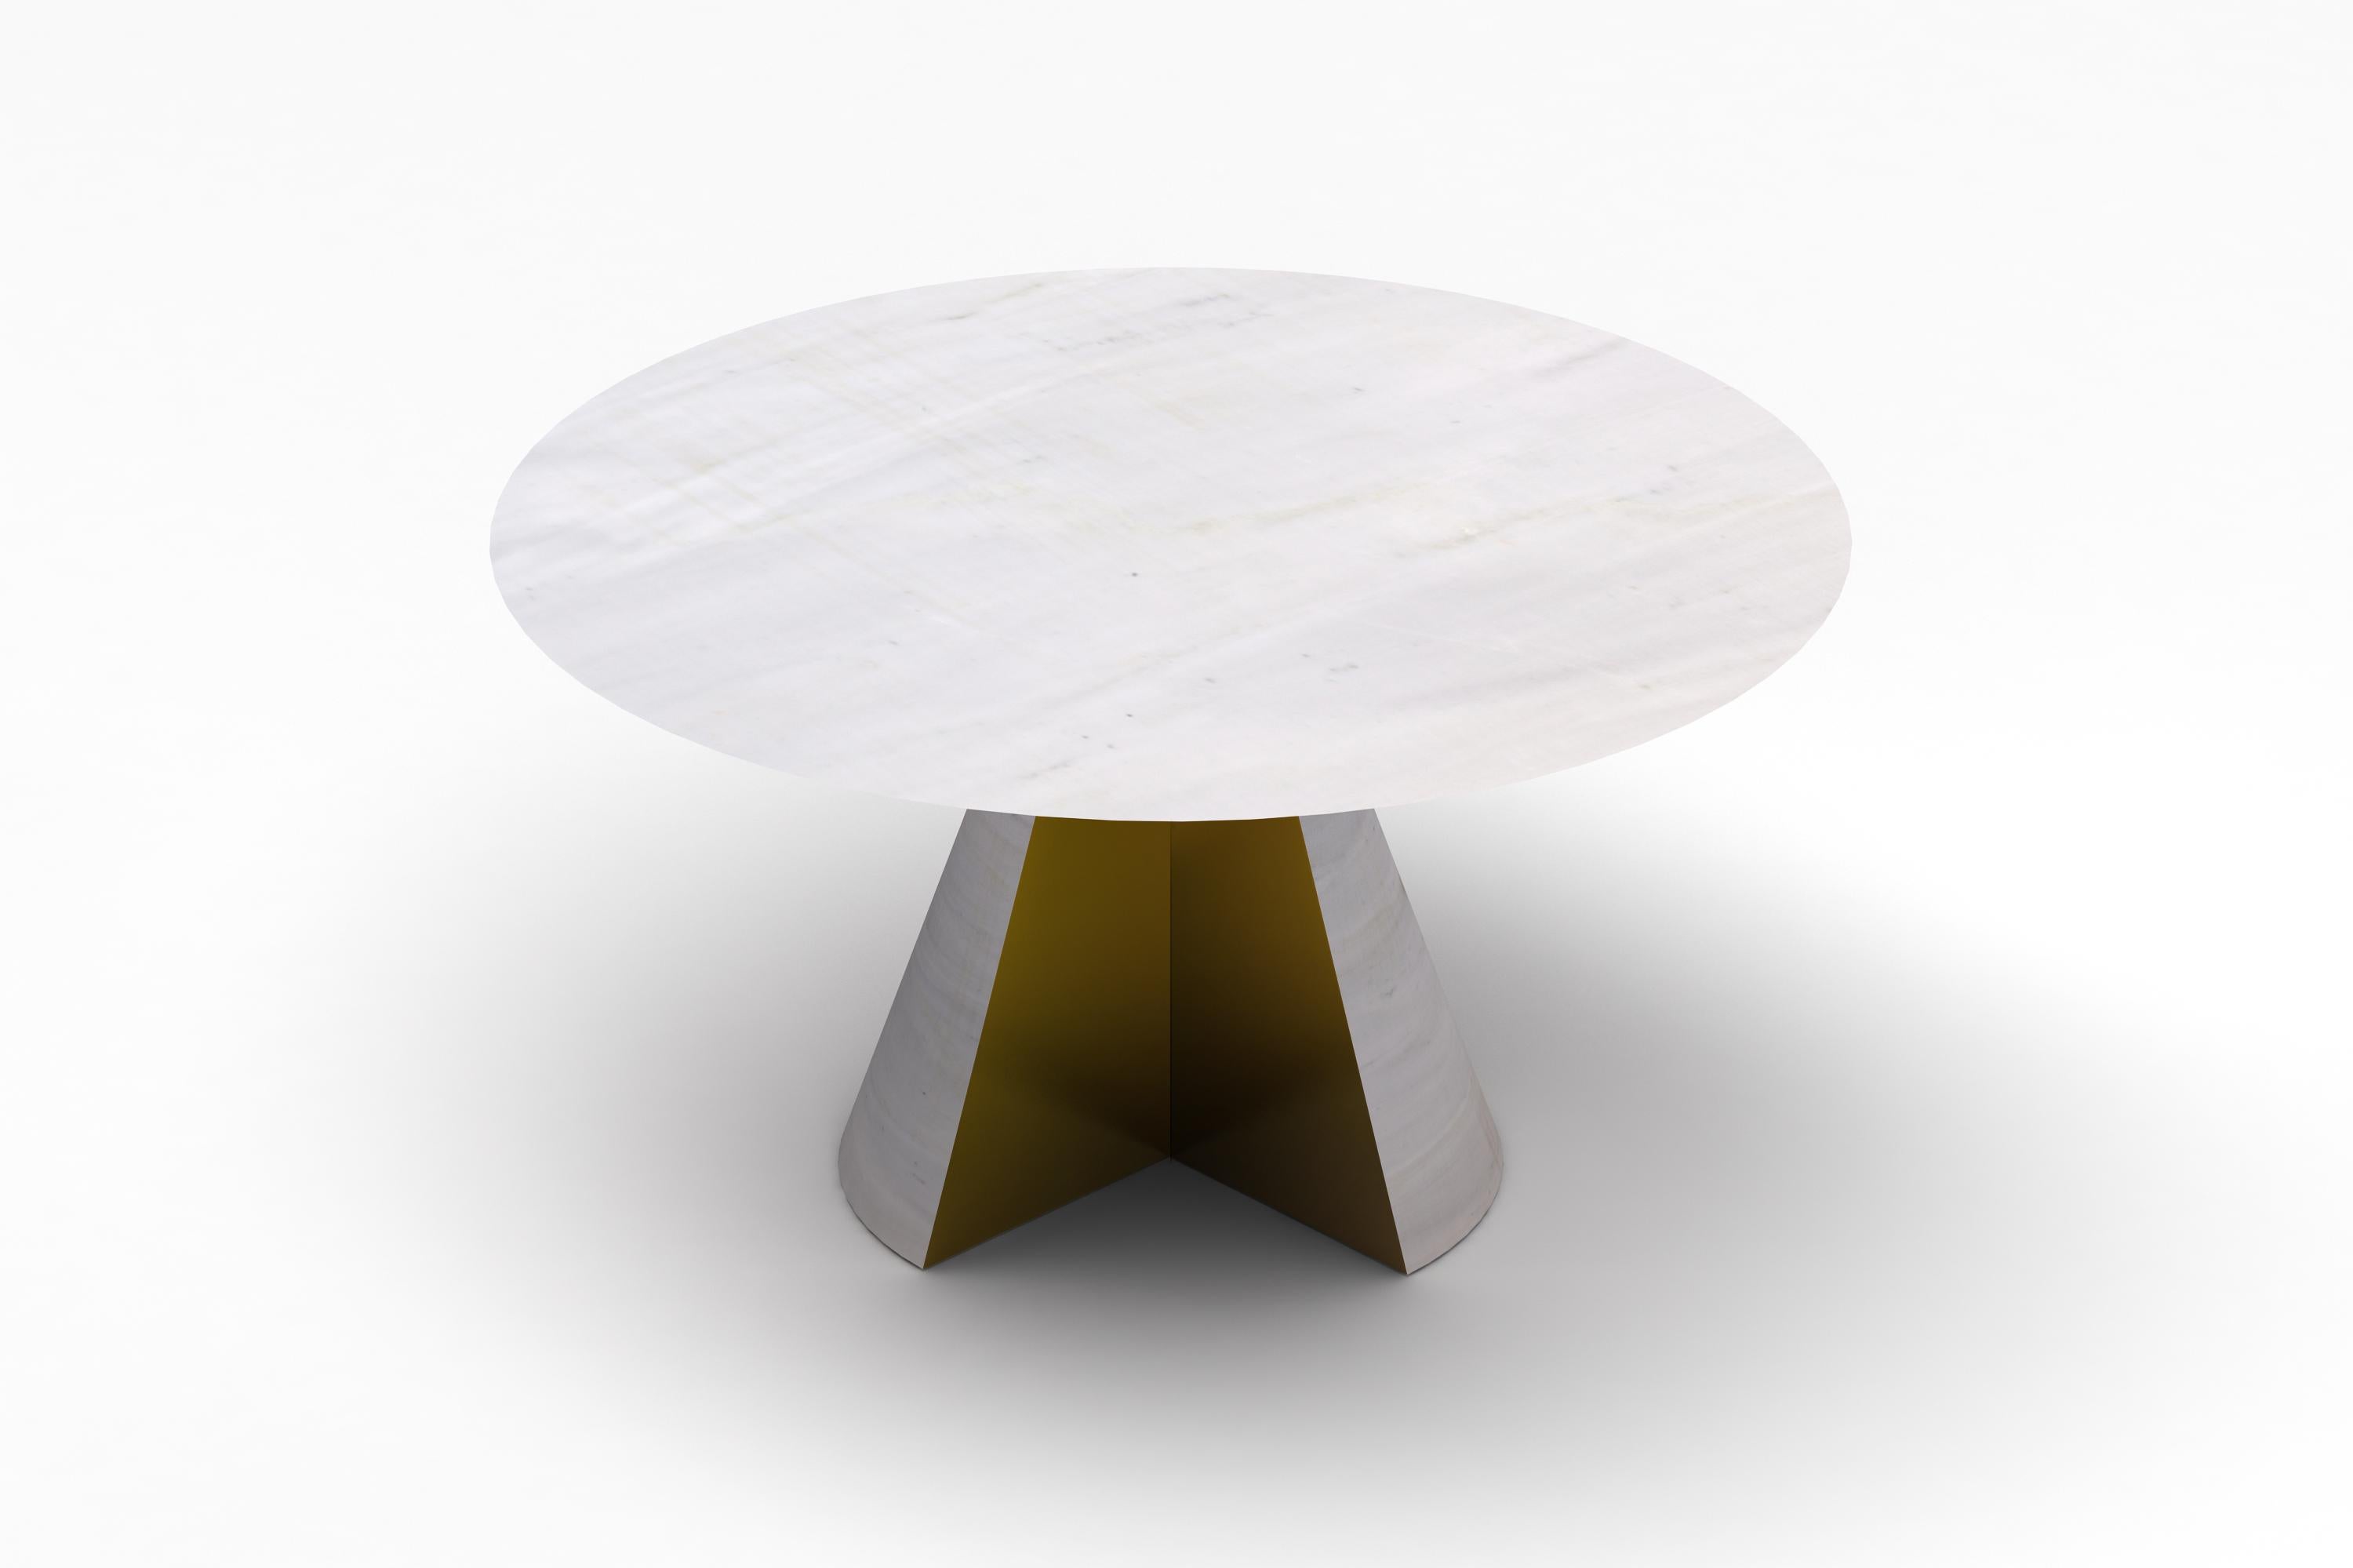 A series of coffee and dining table takes its name 